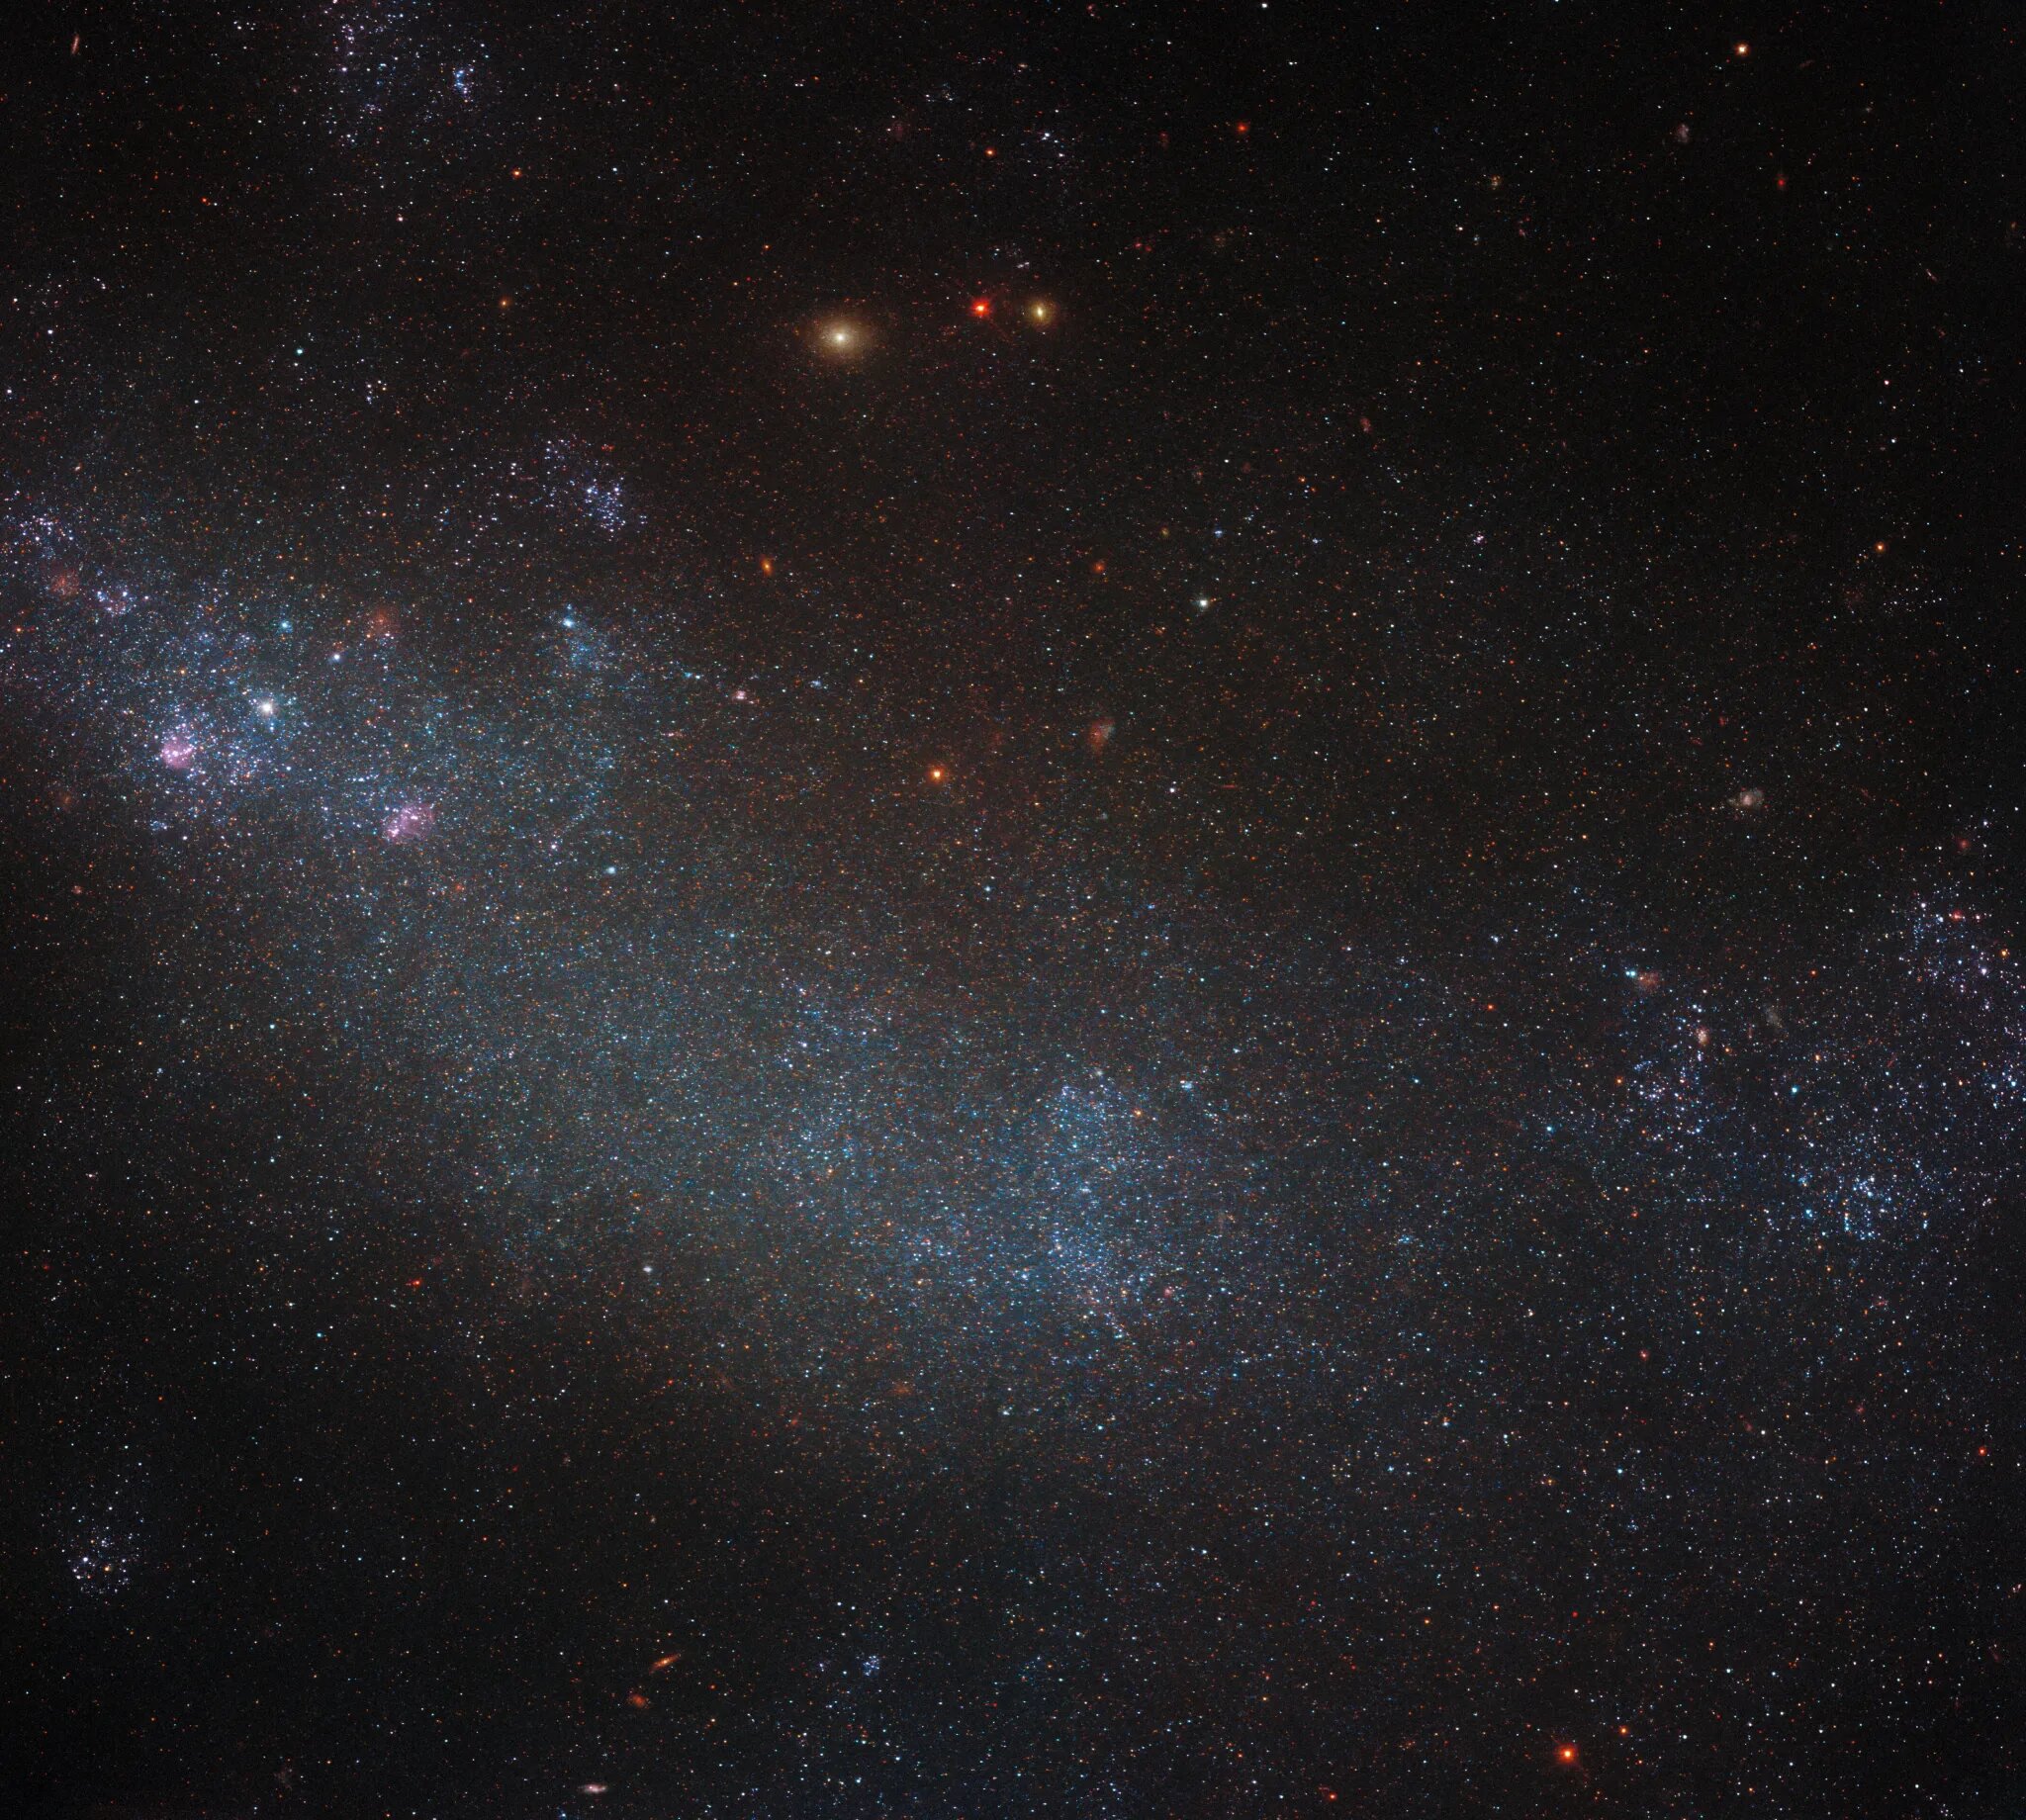 Hubble Observes a Galaxy Concealed by Stellar Shroud